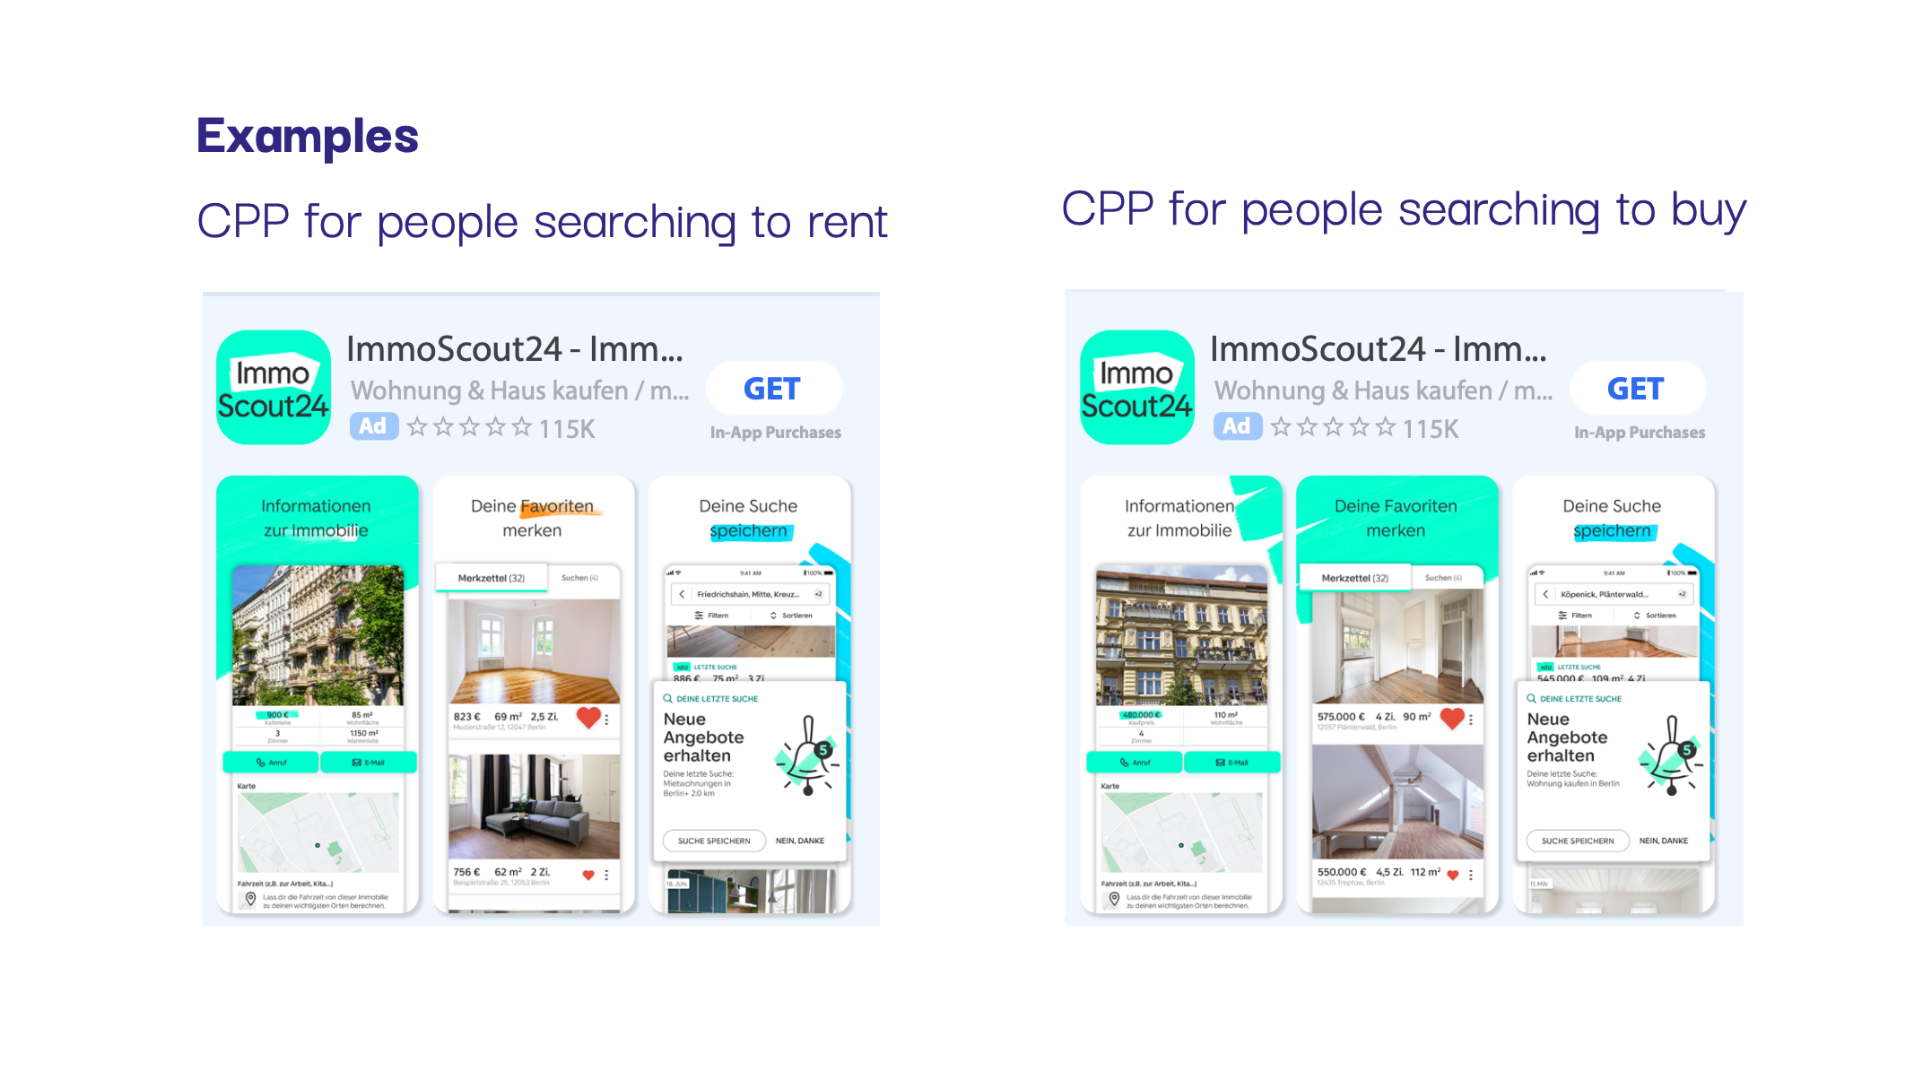 The image shows two side-by-side comparisons of mobile app advertisements for 'ImmoScout24' with the heading 'Examples'. On the left, 'CPP for people searching to rent' shows the app interface with rental property listings, a map view, and features to mark favorites and receive new offer alerts. On the right, 'CPP for people searching to buy' displays similar features for purchasing properties, with listings showing higher prices. Both ads highlight the app's rating, number of reviews (115K), and the option for in-app purchases.